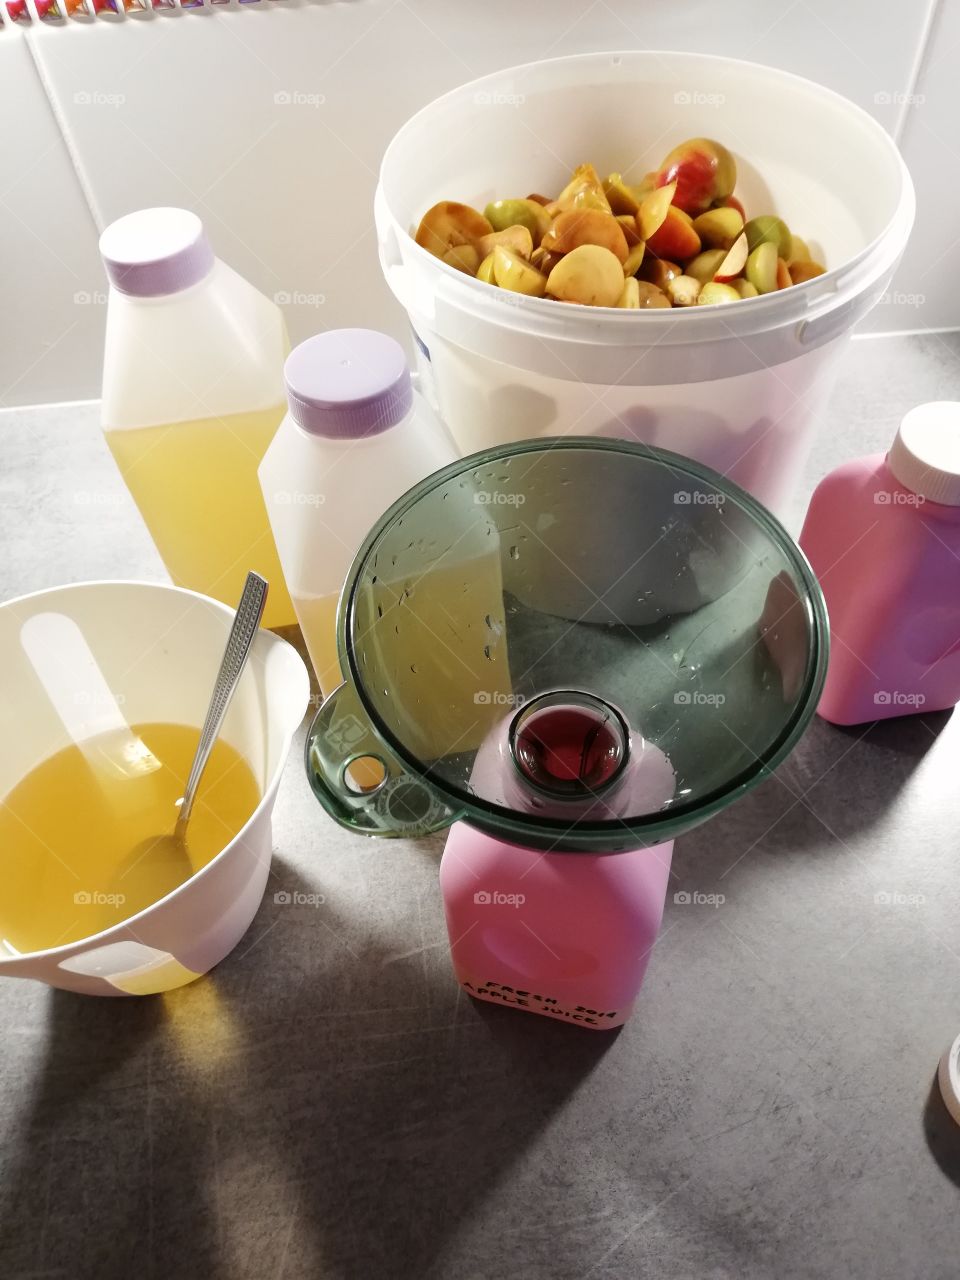 Homemade apple juice is done and is in plastic bottles. Some yellow juice and a tablespoon are in a jug. In a white bucket halves of fruits. A green funnel in a pink bottle, stoppers on the full bottles.